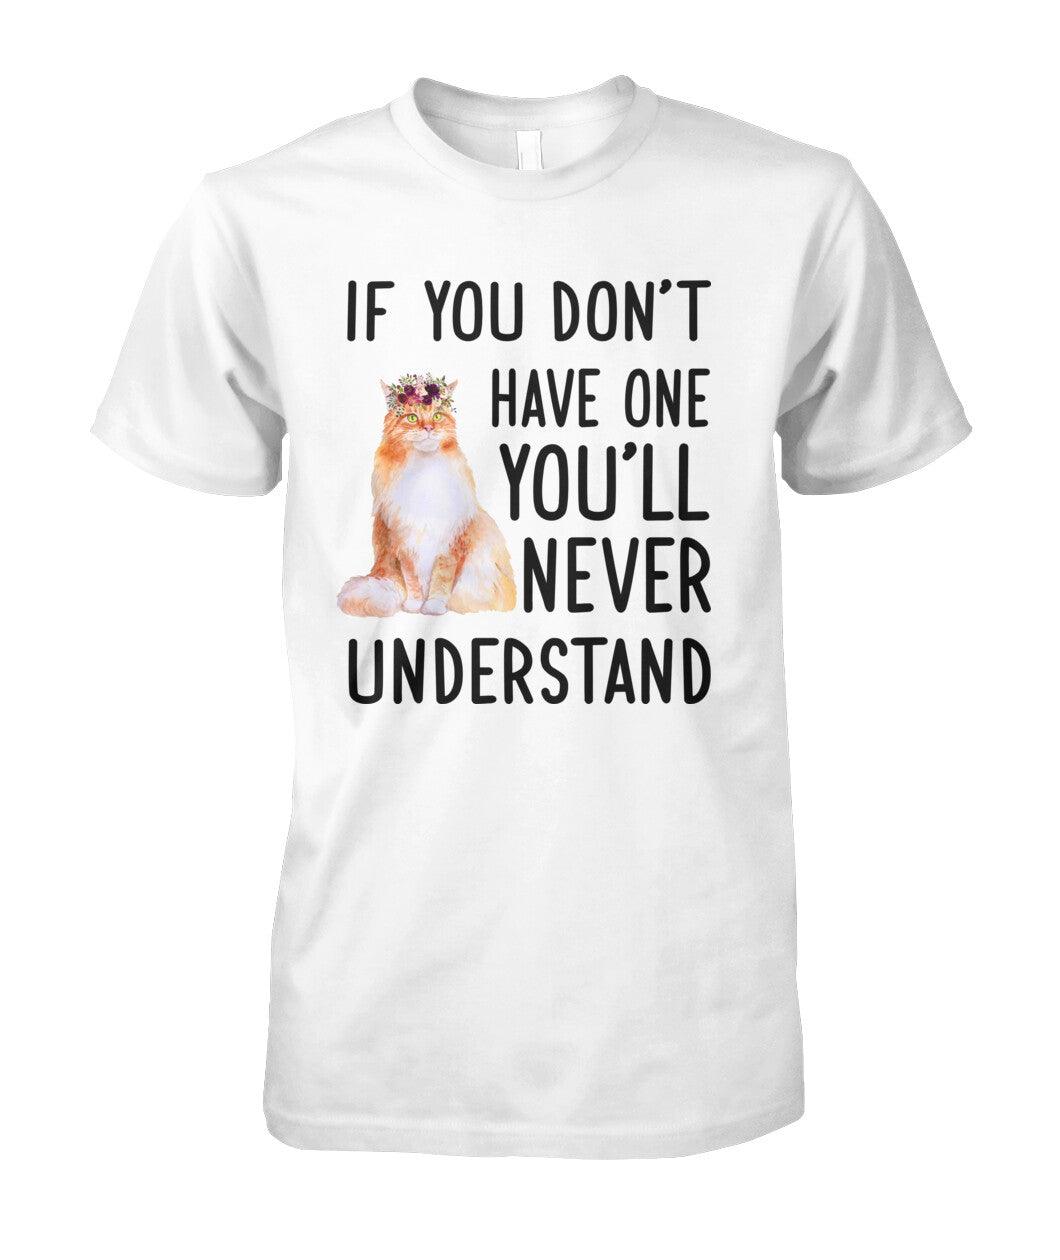 Maine Coon Unisex T Shirt - If You Don't Have One You'll Never Understand Unisex T Shirt - Gift For Dog Lovers, Friends, Family - Amzanimalsgift